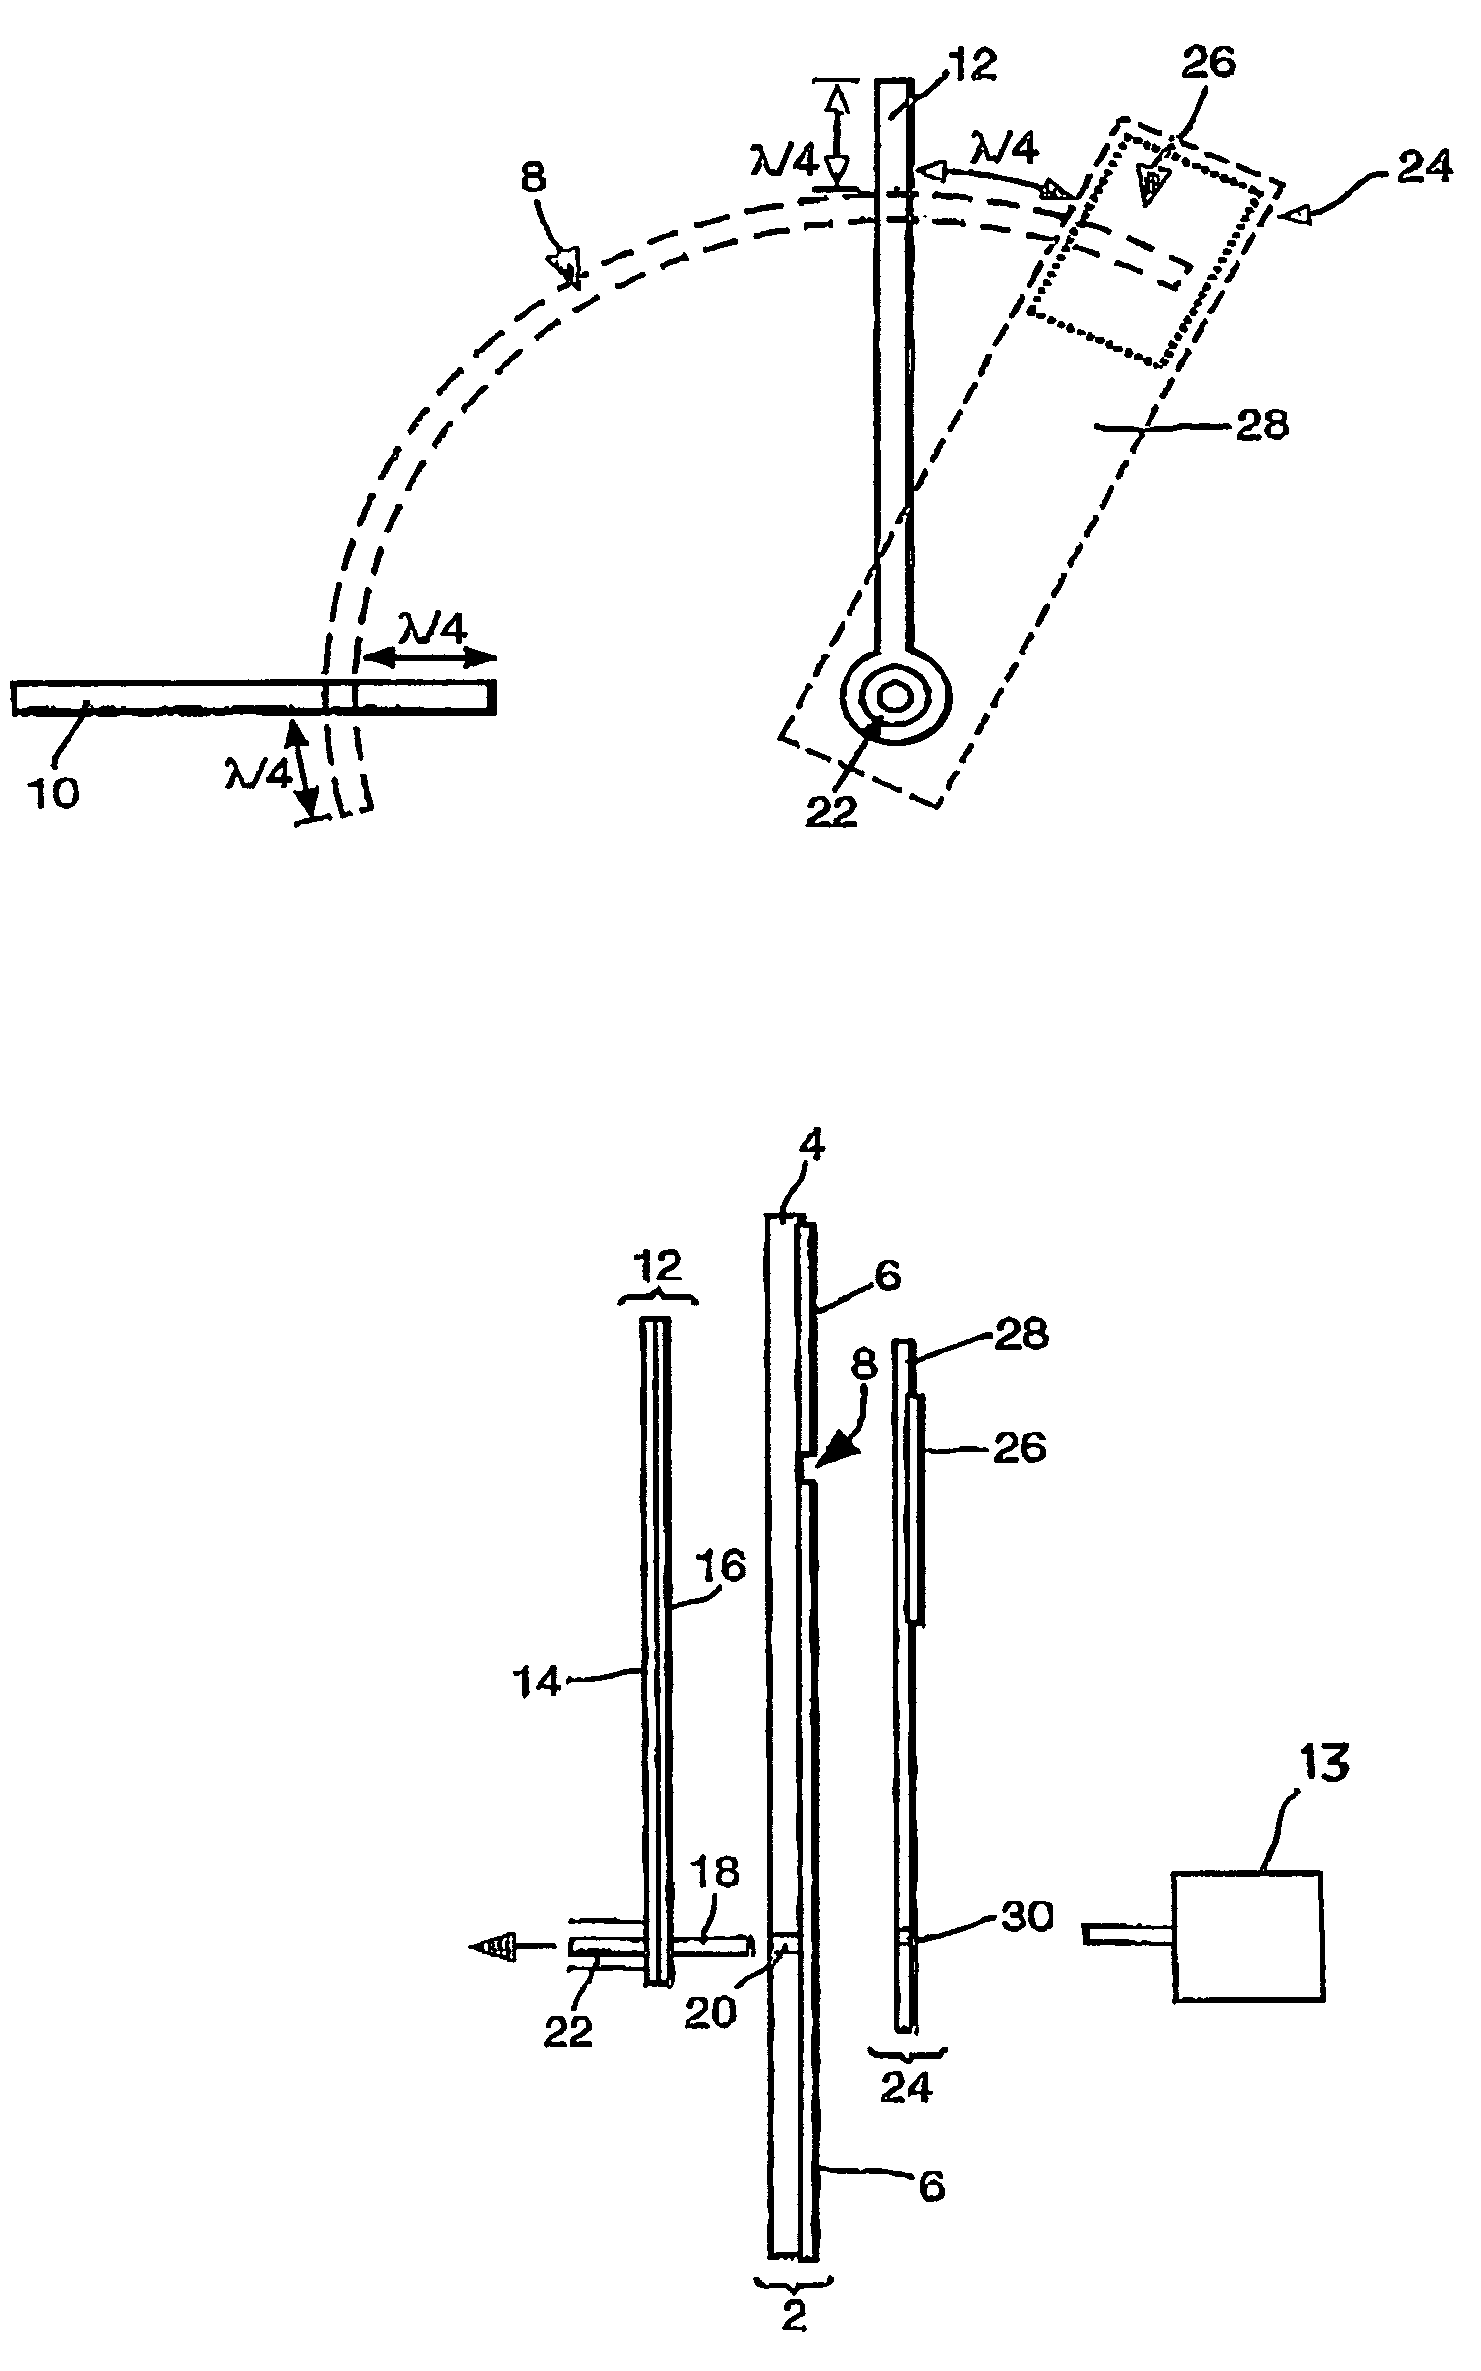 Phase shifter device having a microstrip waveguide and shorting patch movable along a slot line waveguide